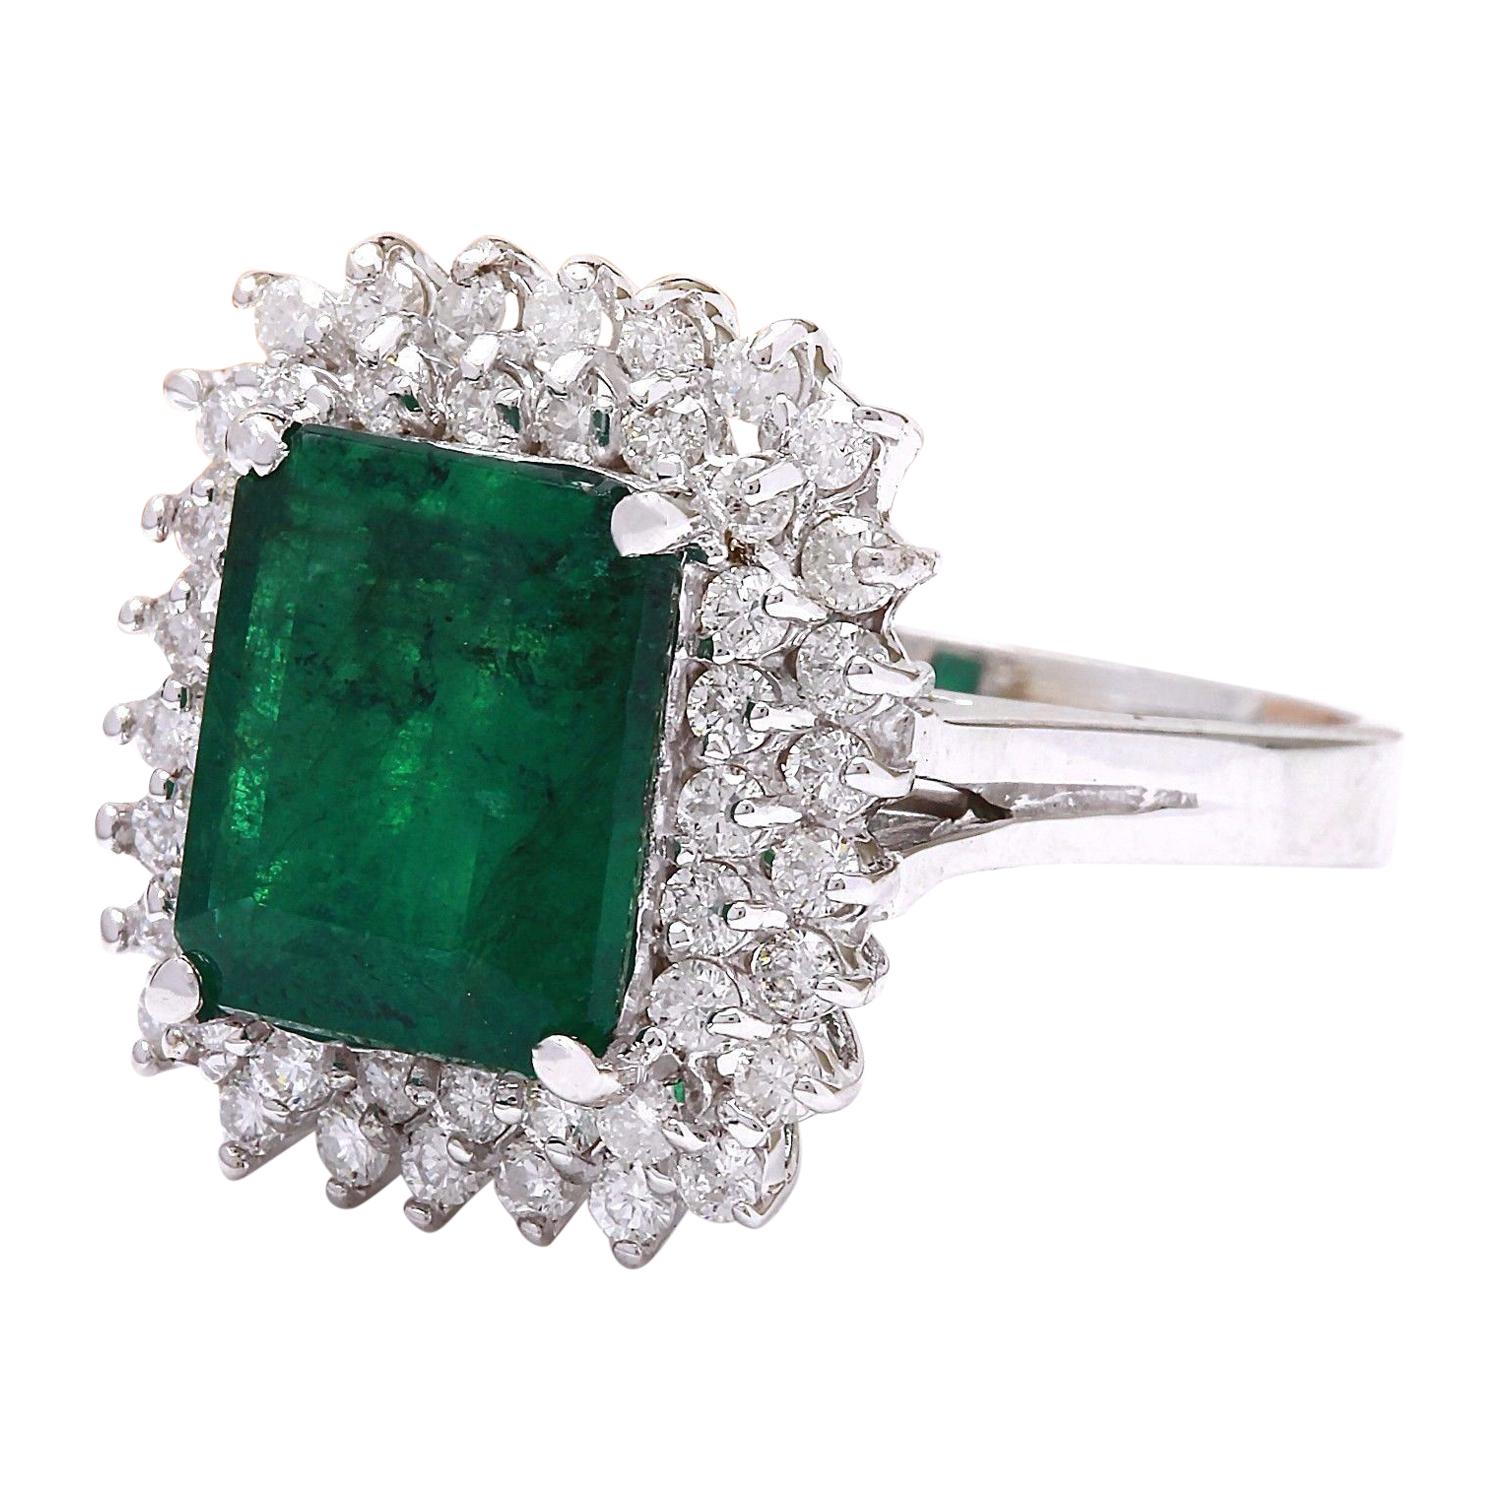 4.20 Carat Natural Emerald 14K Solid White Gold Diamond Ring
 Item Type: Ring
 Item Style: Engagement
 Material: 14K White Gold
 Mainstone: Emerald
 Stone Color: Green
 Stone Weight: 3.30 Carat
 Stone Shape: Emerald
 Stone Quantity: 1
 Stone